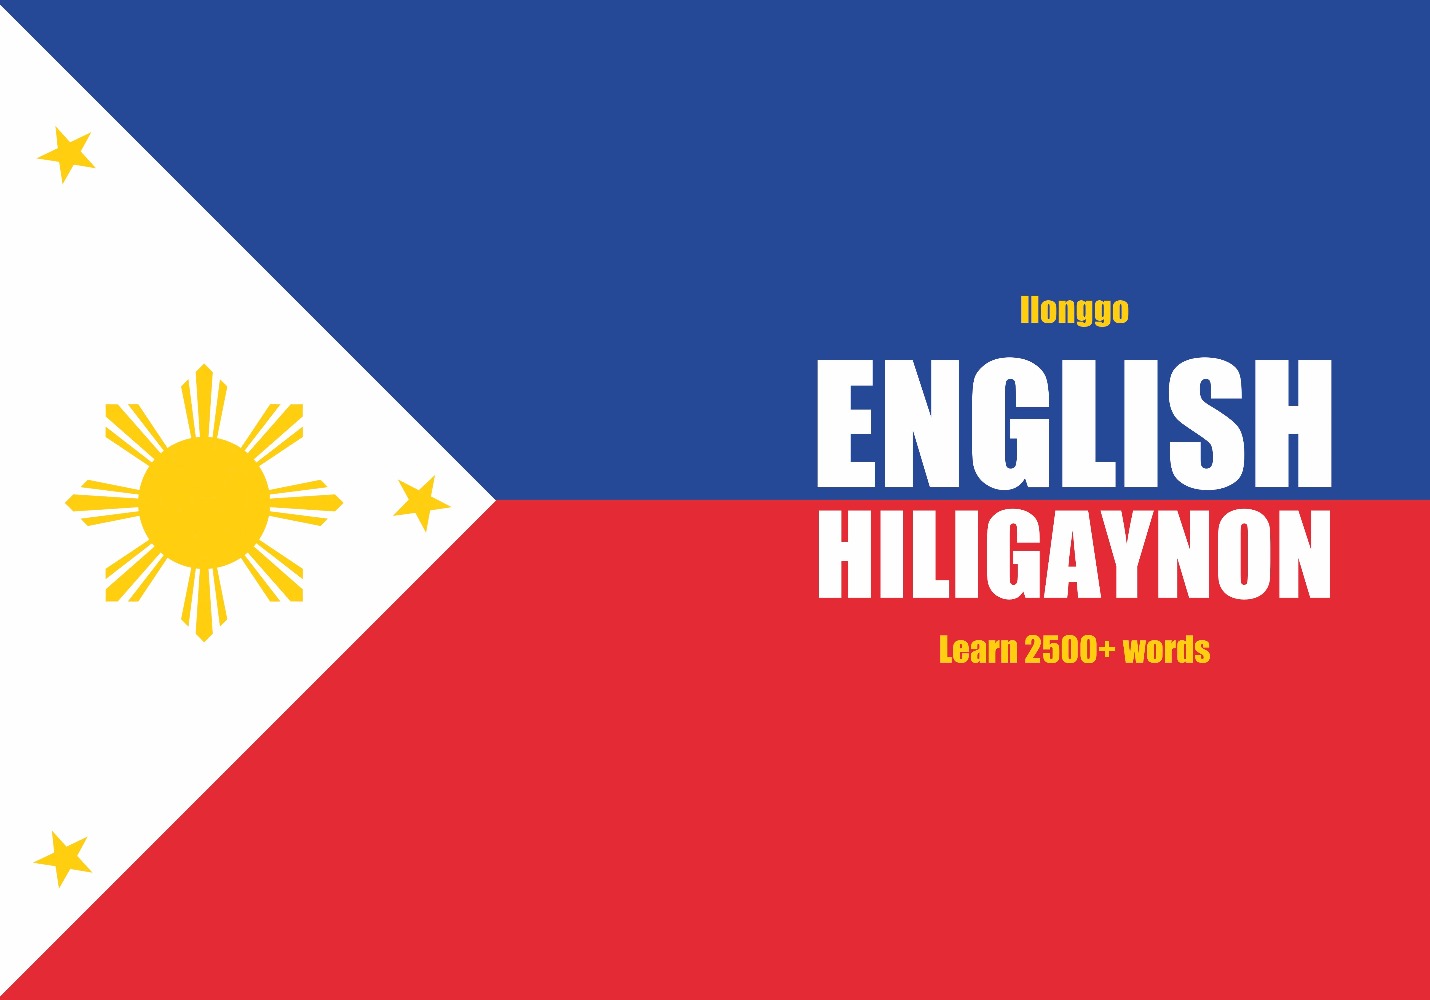 Hiligaynon language learning notebook cover